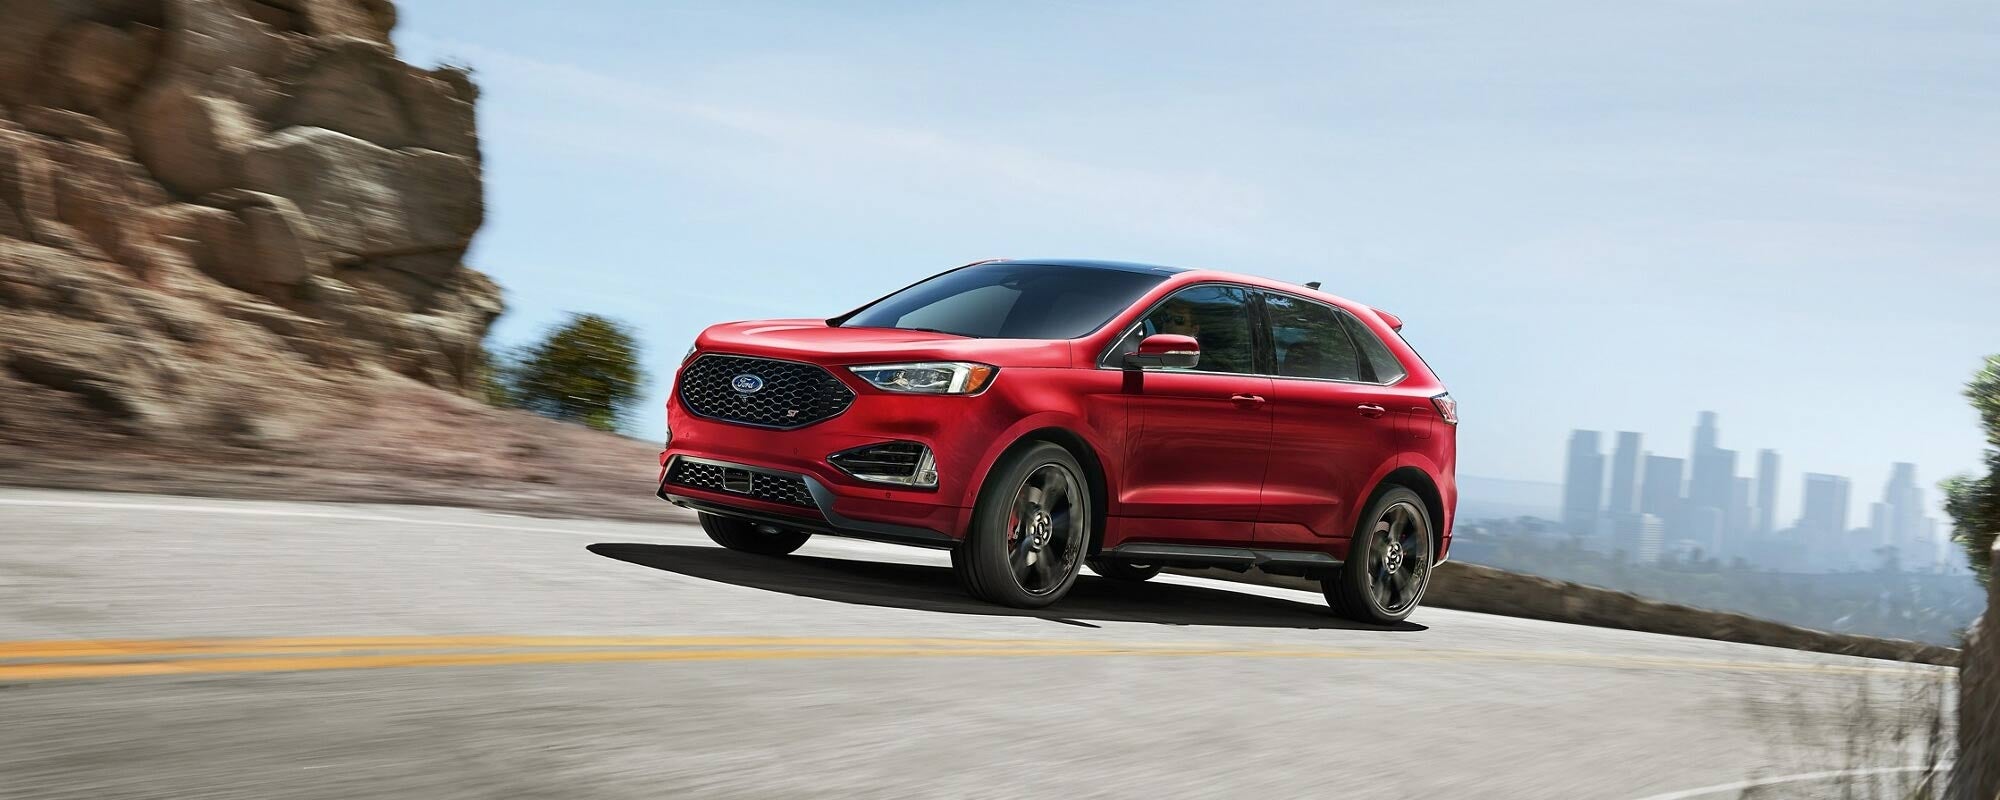 Ford Edge for lease